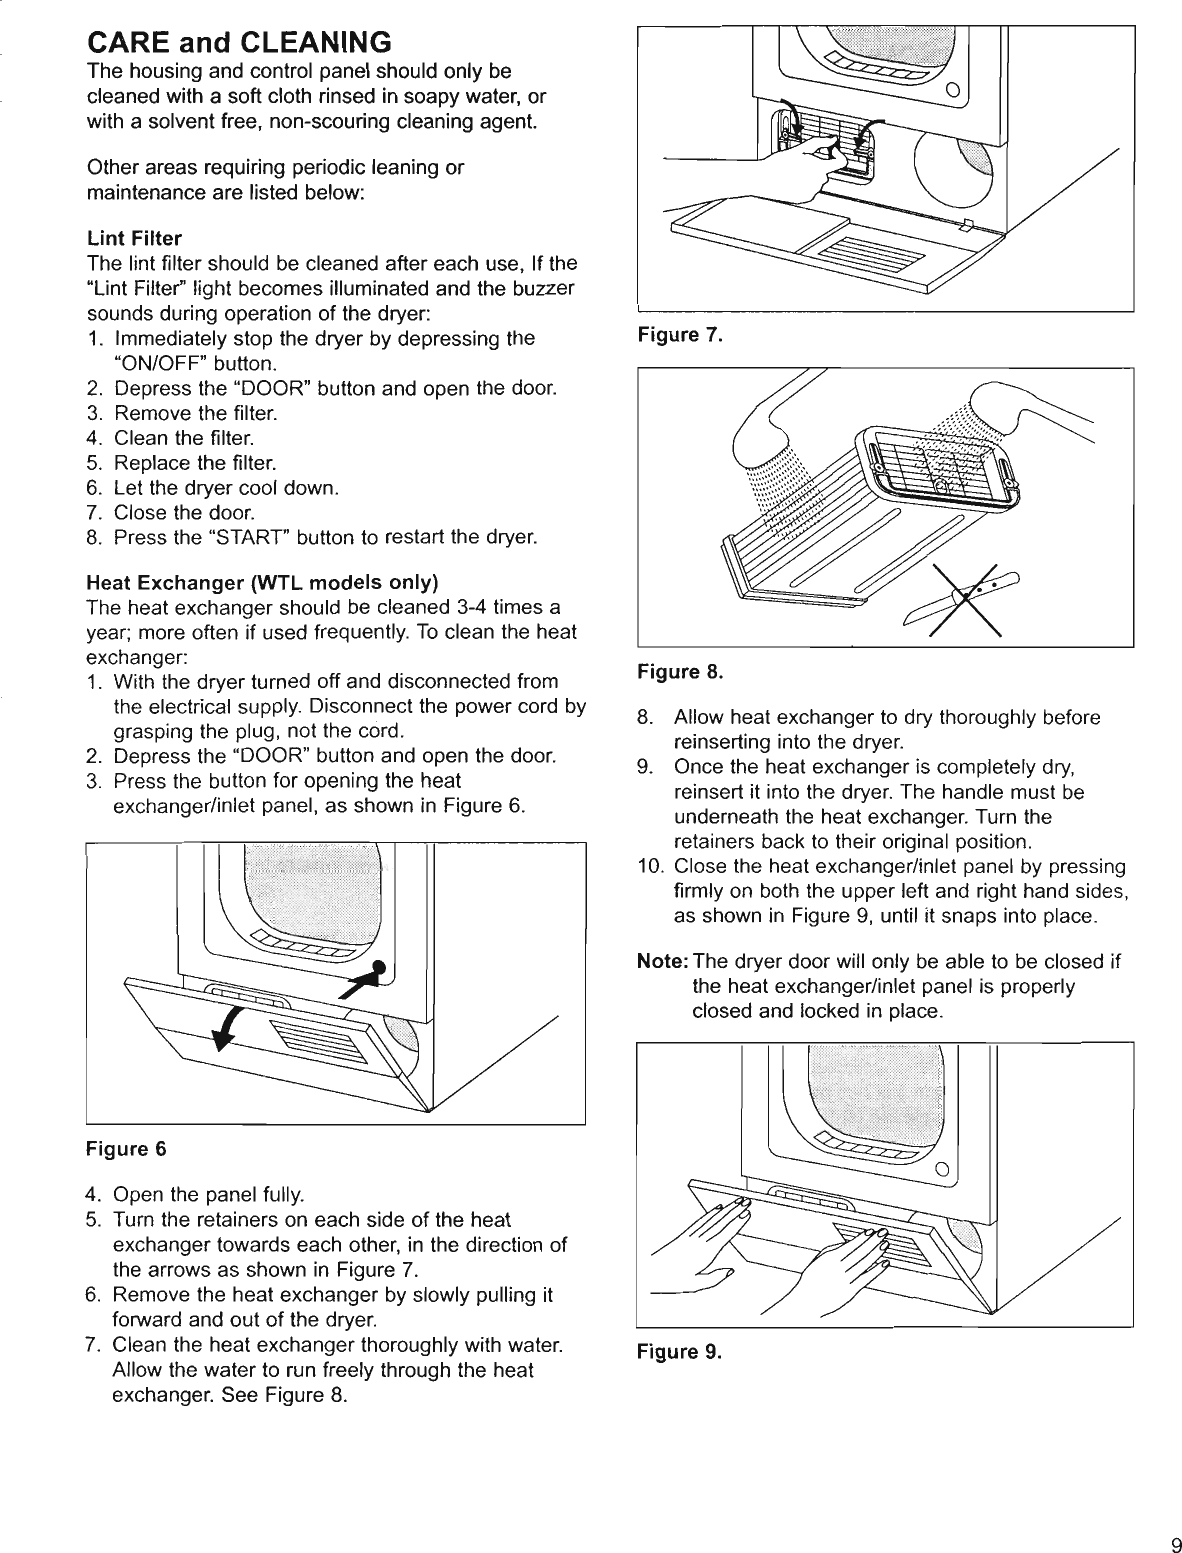 Page 9 of 12 - Boschhome Boschhome-Bosch-Appliances-Clothes-Dryer-Wta-3500-Users-Manual- Use & Care Manual For Bosch WTA 3500 And WTL 5400 Dryers  Boschhome-bosch-appliances-clothes-dryer-wta-3500-users-manual